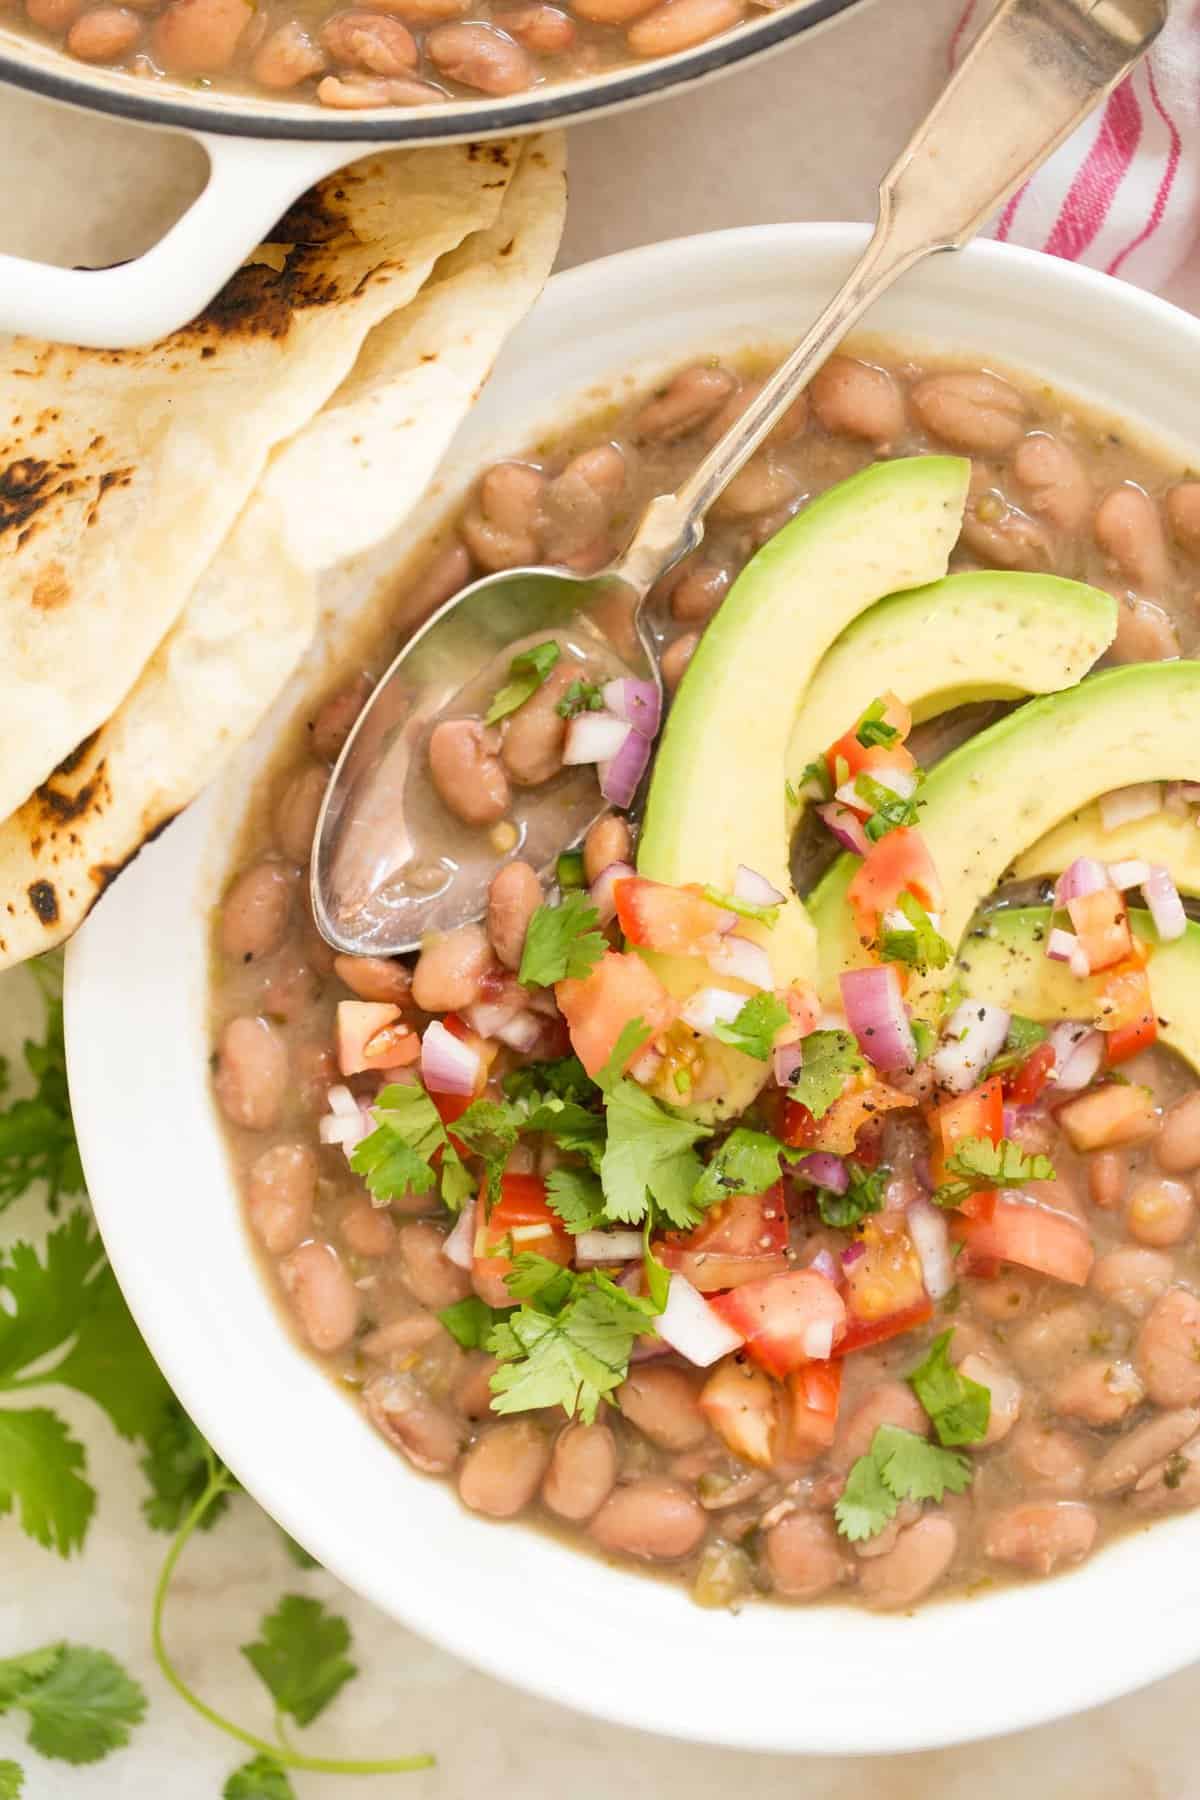 Mexican Pinto Beans From Scratch Recipe - The Harvest Kitchen